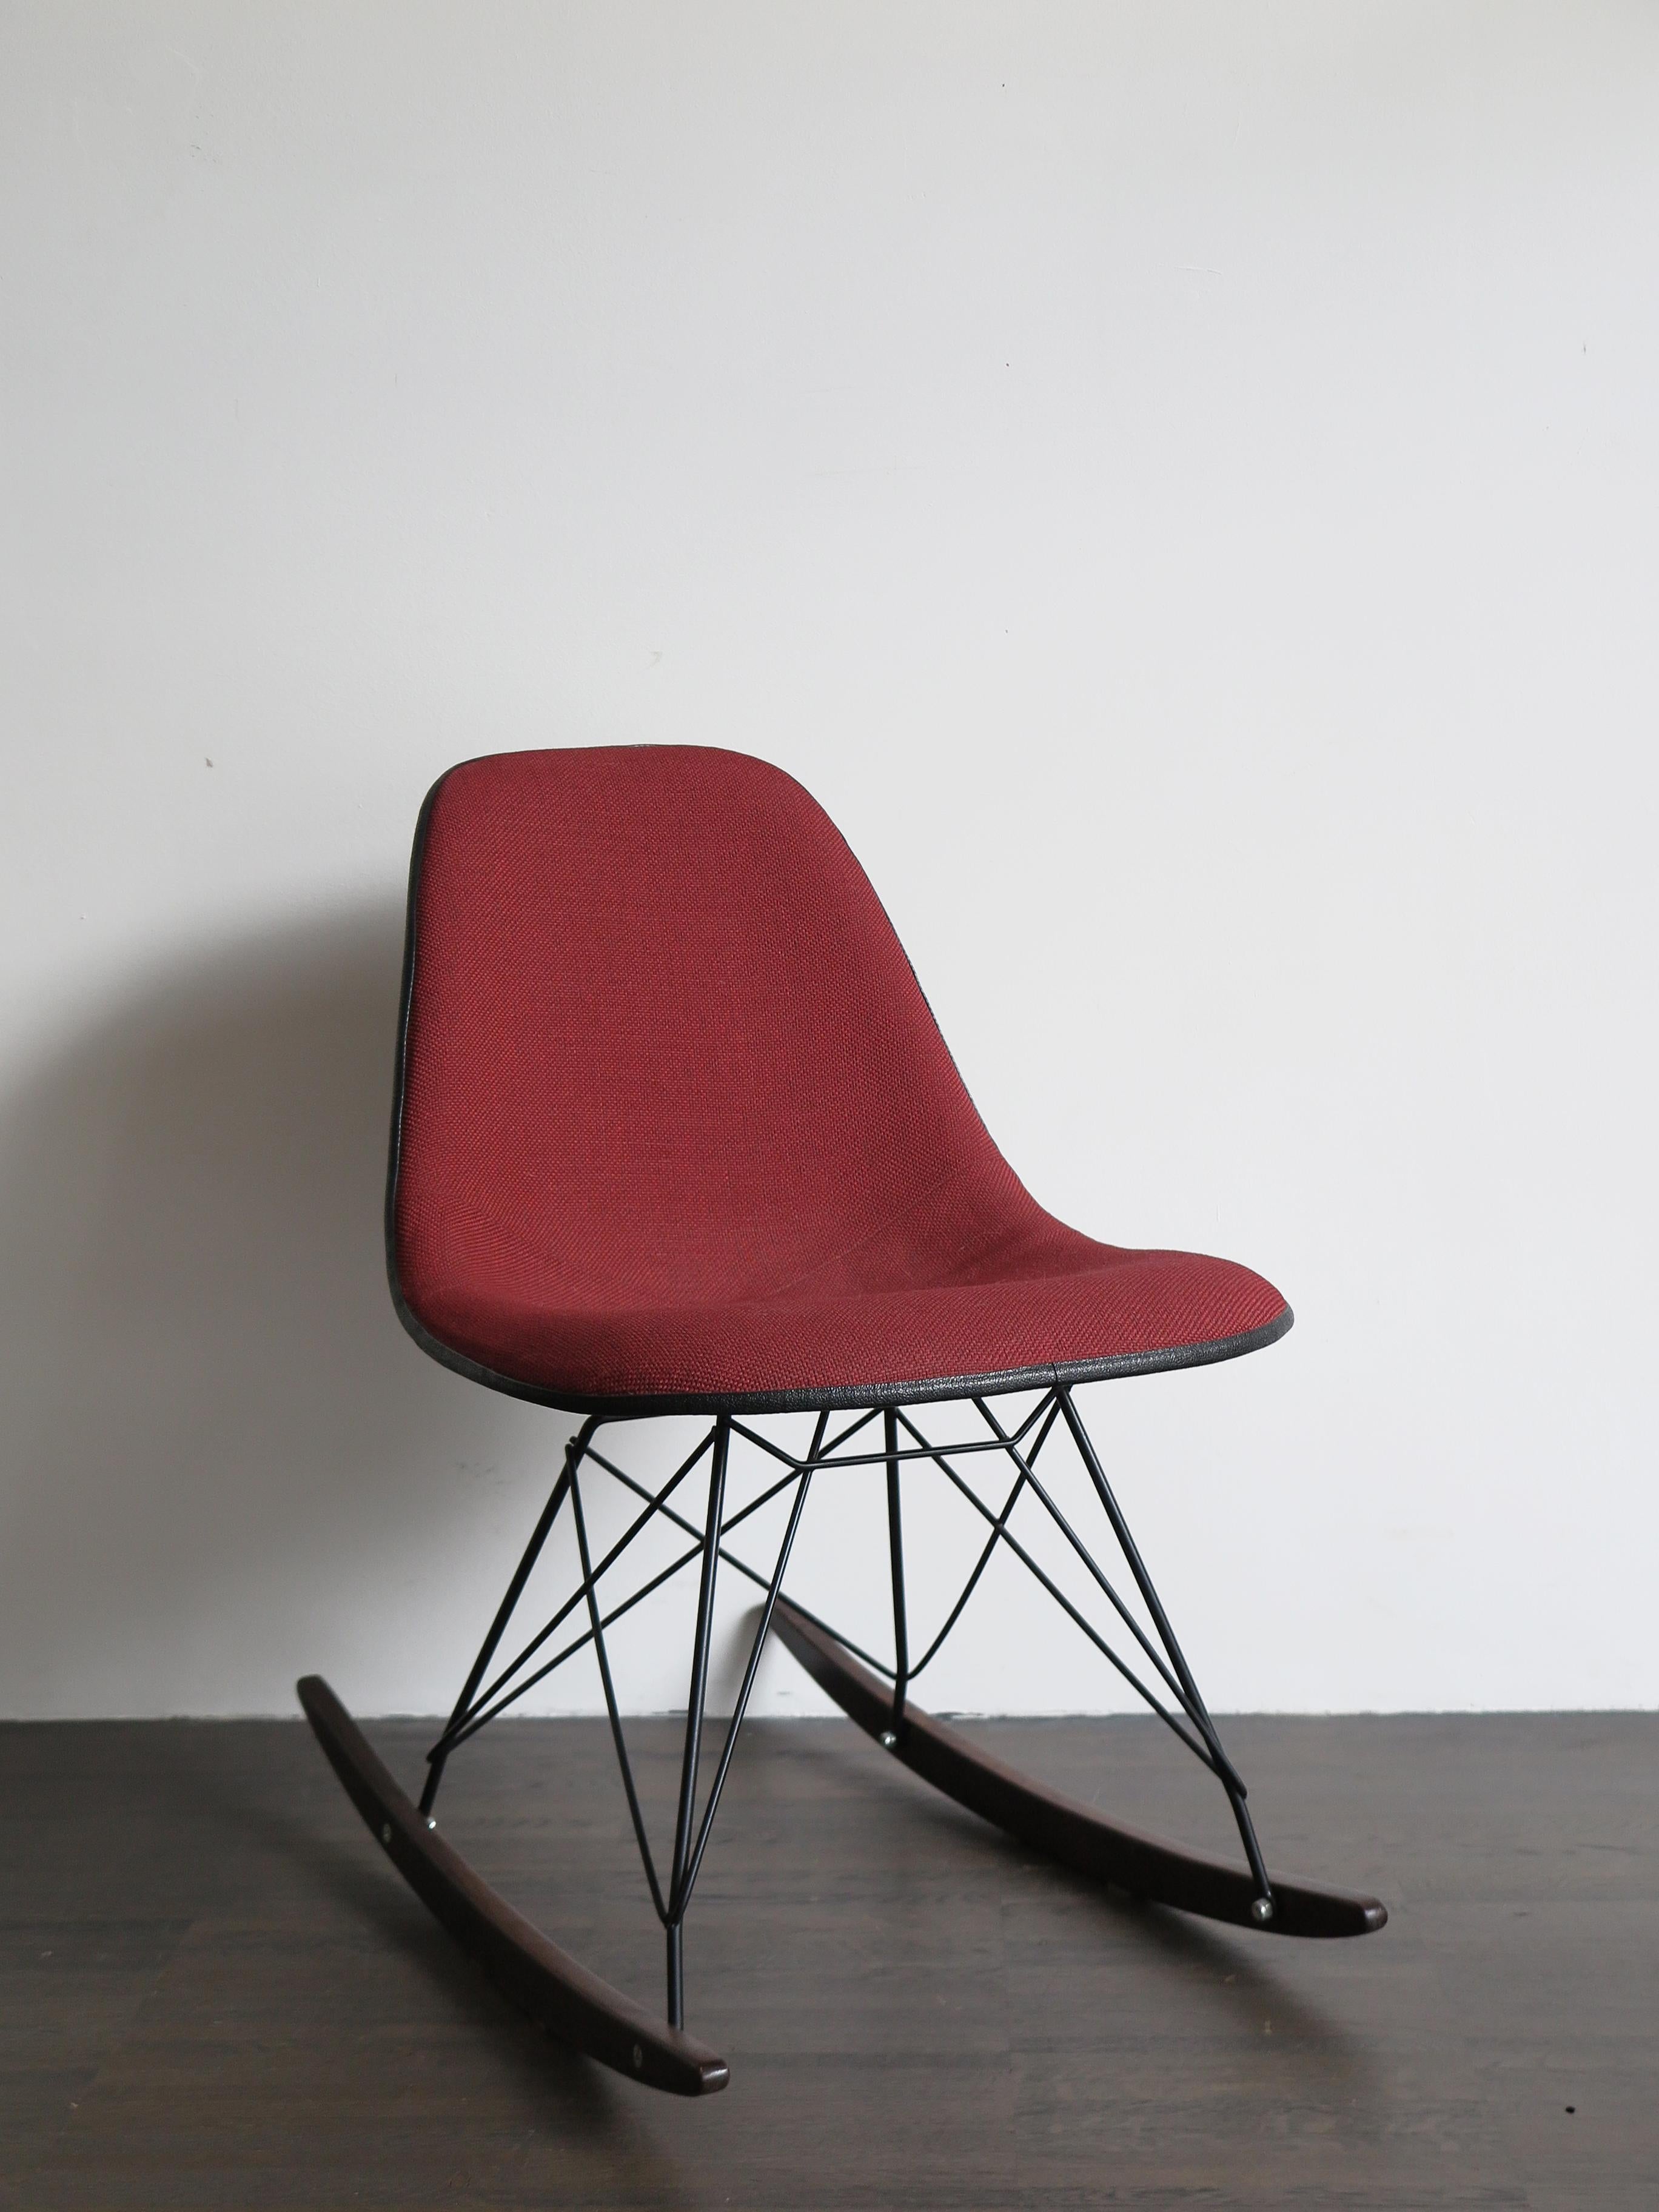 American Mid-Century Modern design rocking chair designed by Charles & Ray Eames and produced by Herman Miller with original fiberglass frame and fabric upholstered seat, refurbished and certified under seat by Herman Miller, USA 1960s
Please note